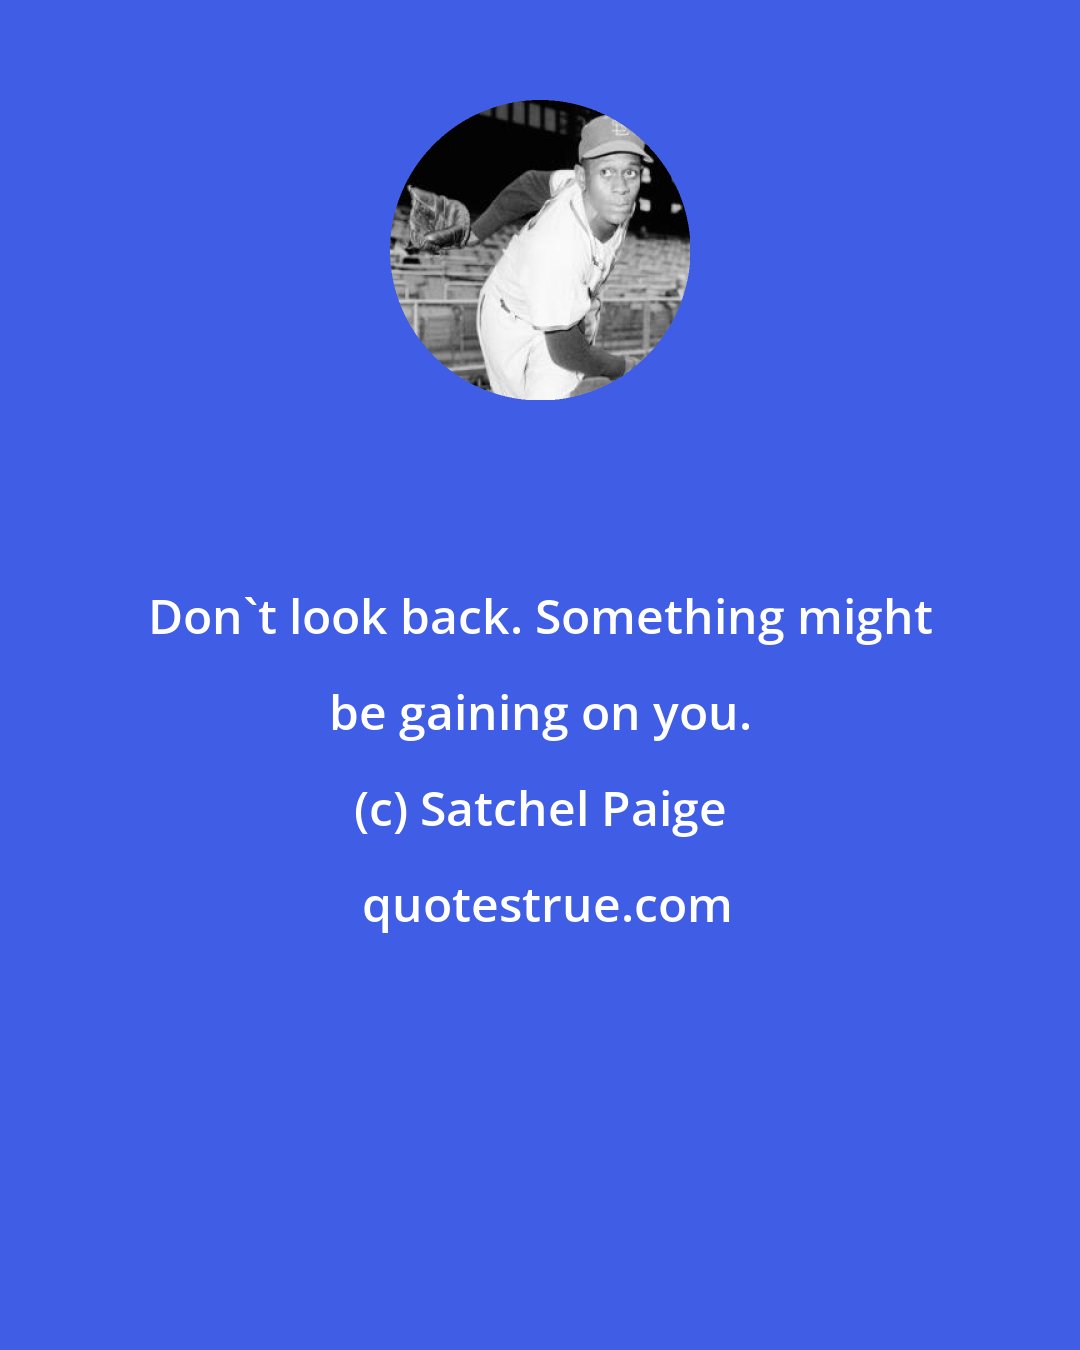 Satchel Paige: Don't look back. Something might be gaining on you.